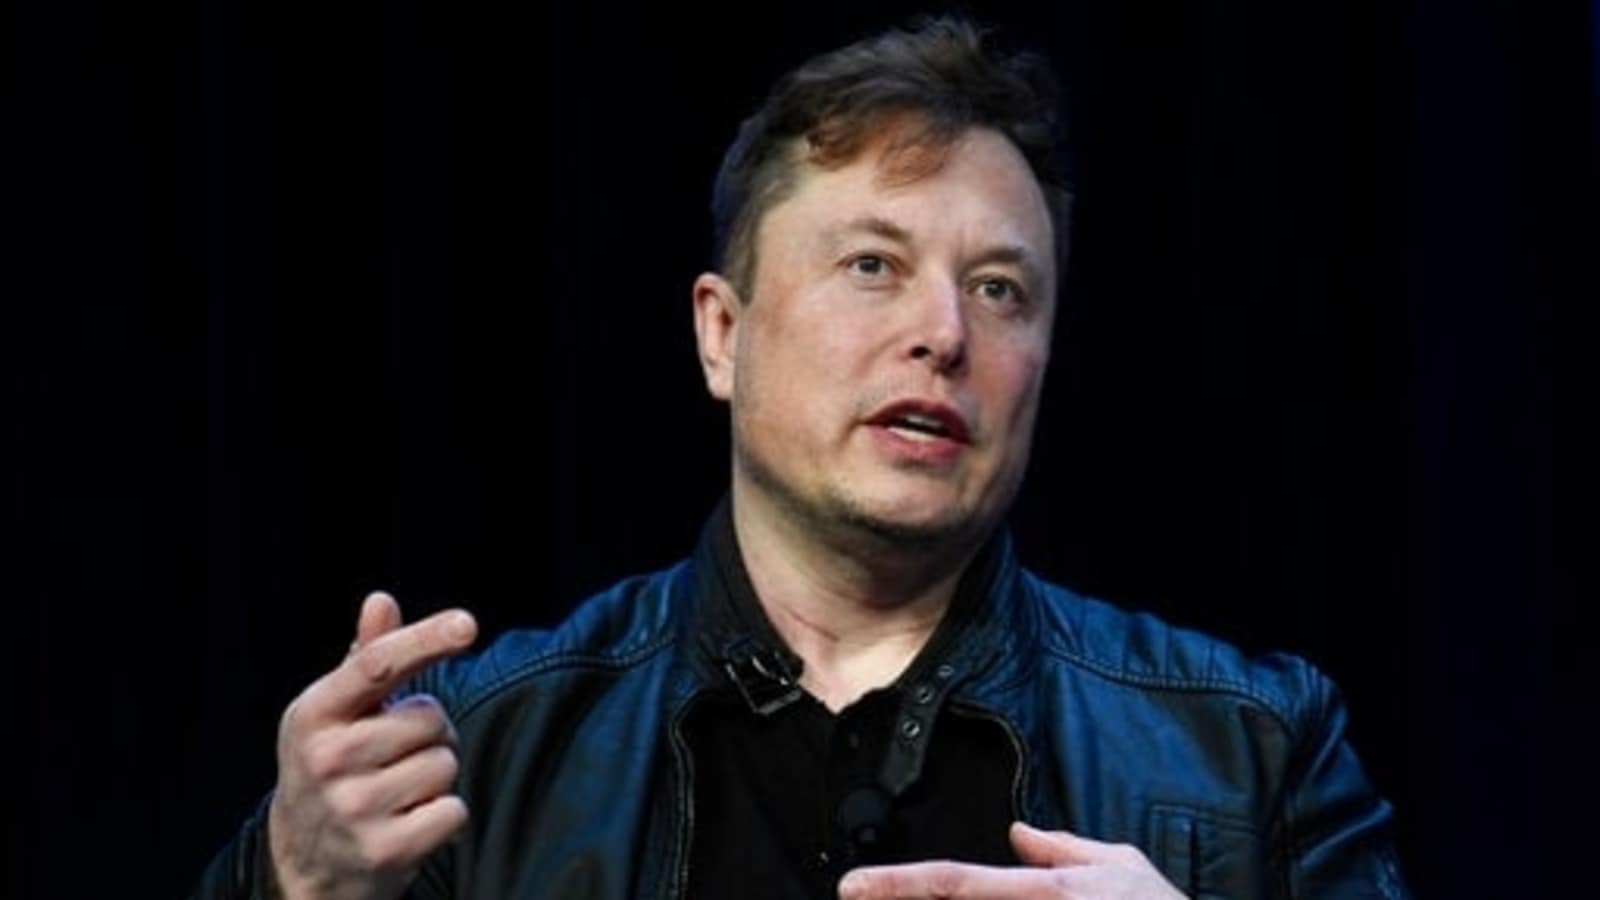 Elon Musk decided not to join Twitter board, says CEO Parag Agrawal